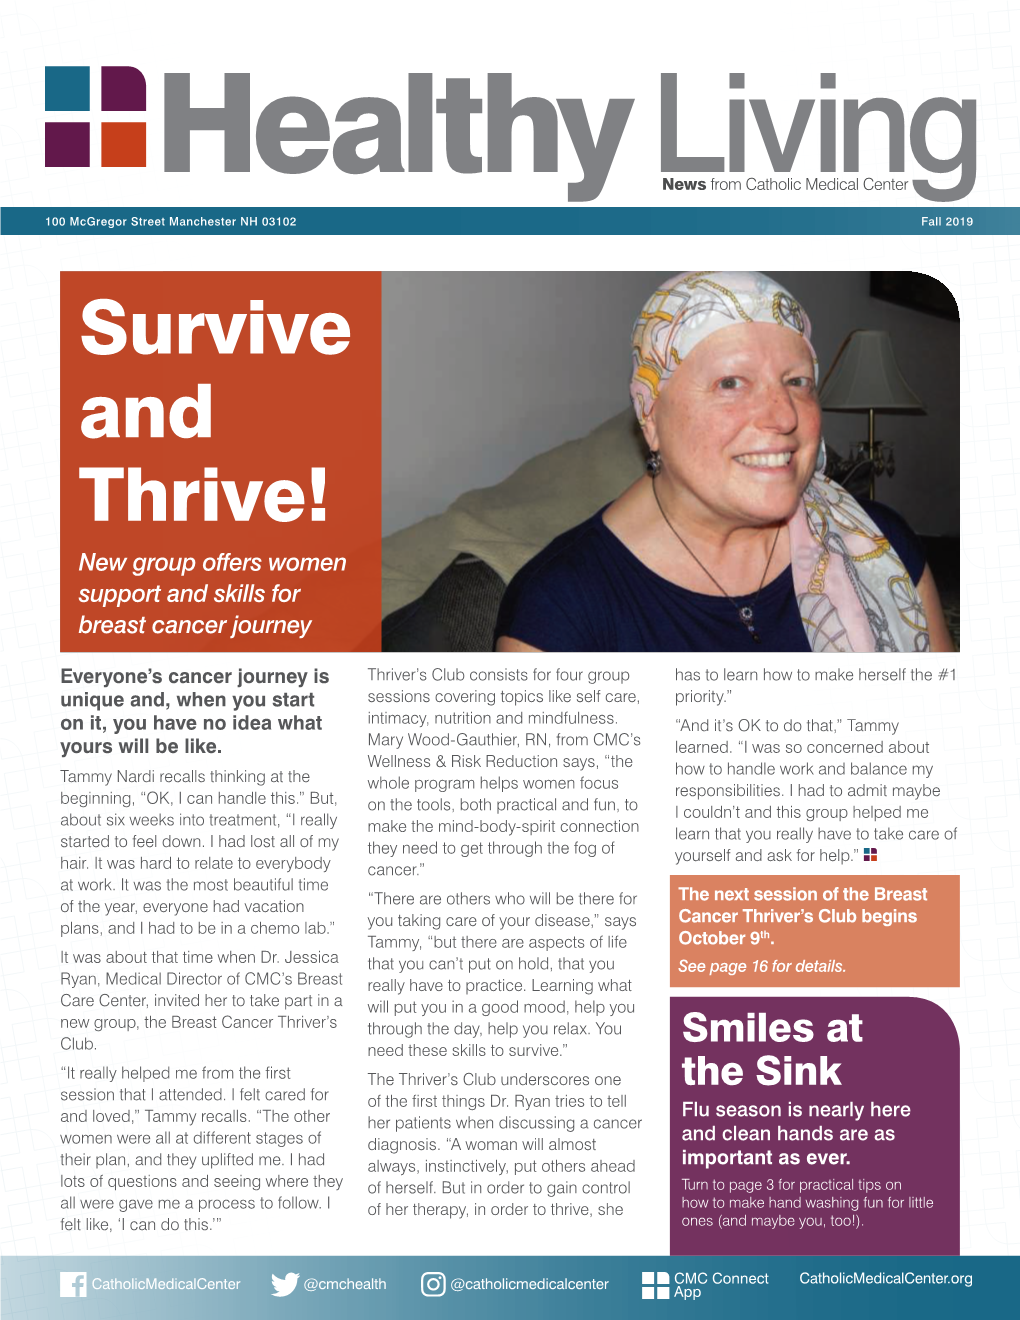 Fall 2019 Survive and Thrive! New Group Offers Women Support and Skills for Breast Cancer Journey